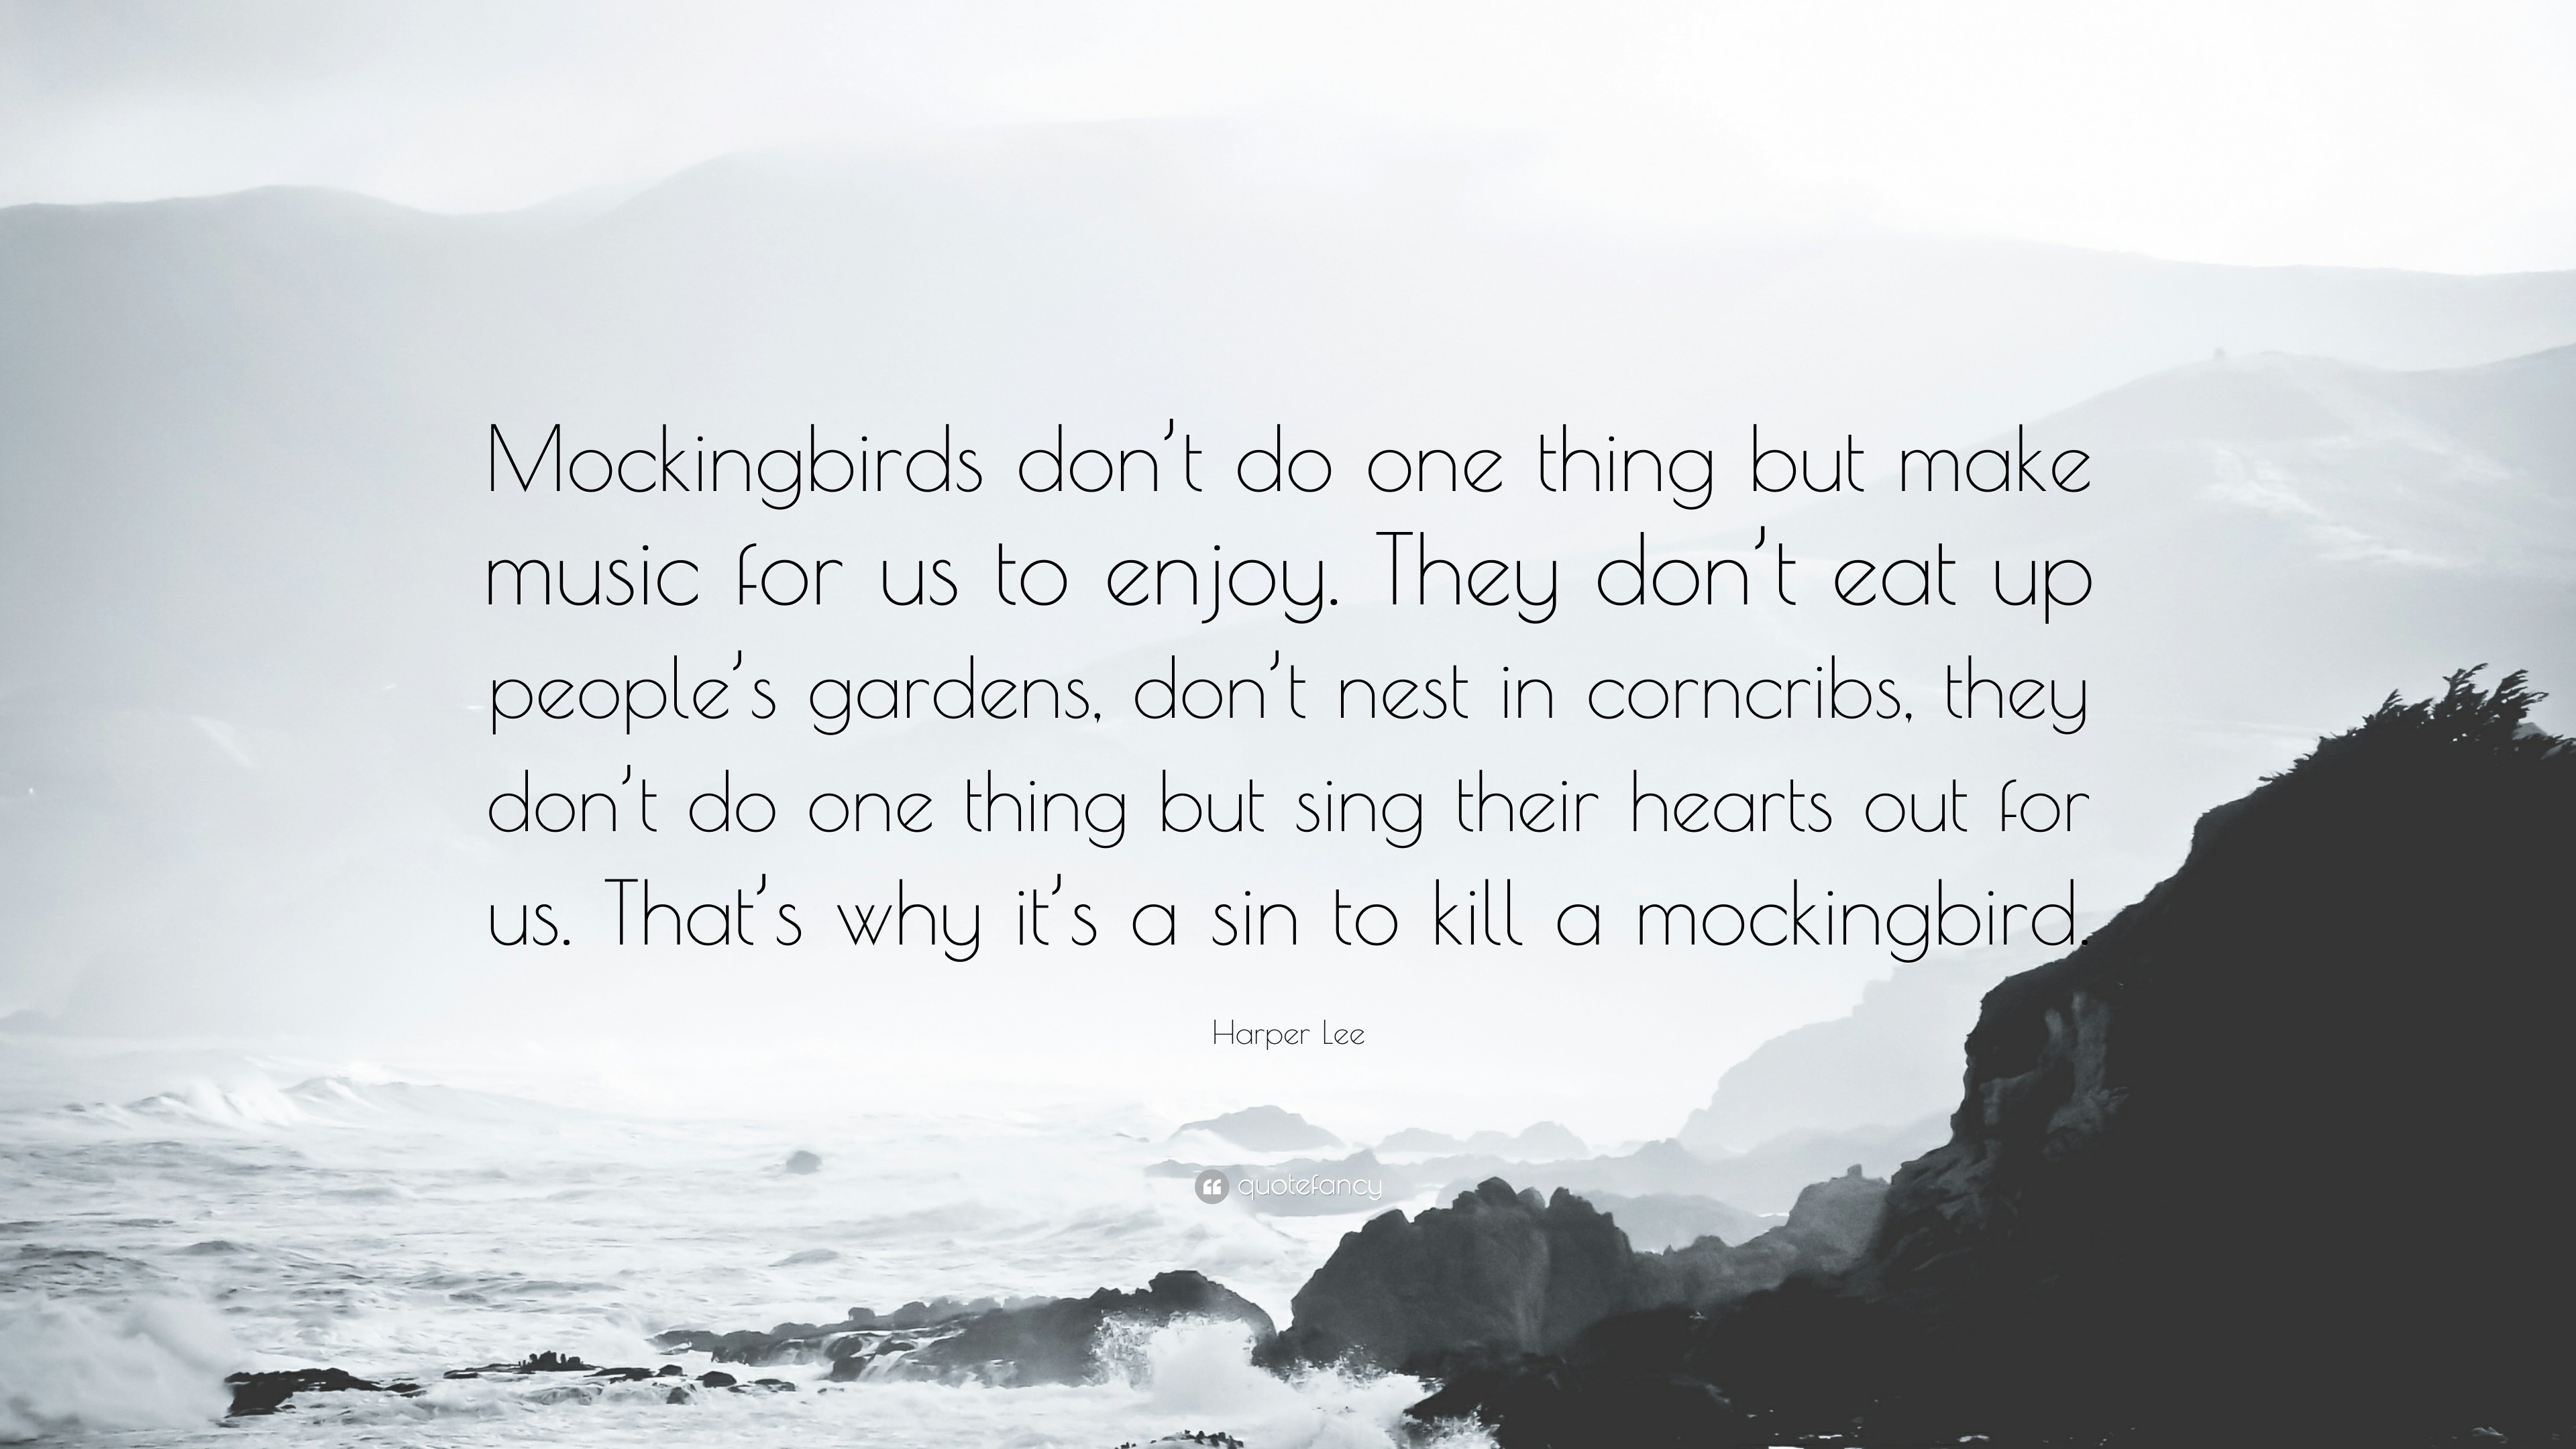 3840x2160 Harper Lee Quote: “Mockingbirds don't do one thing but make music for